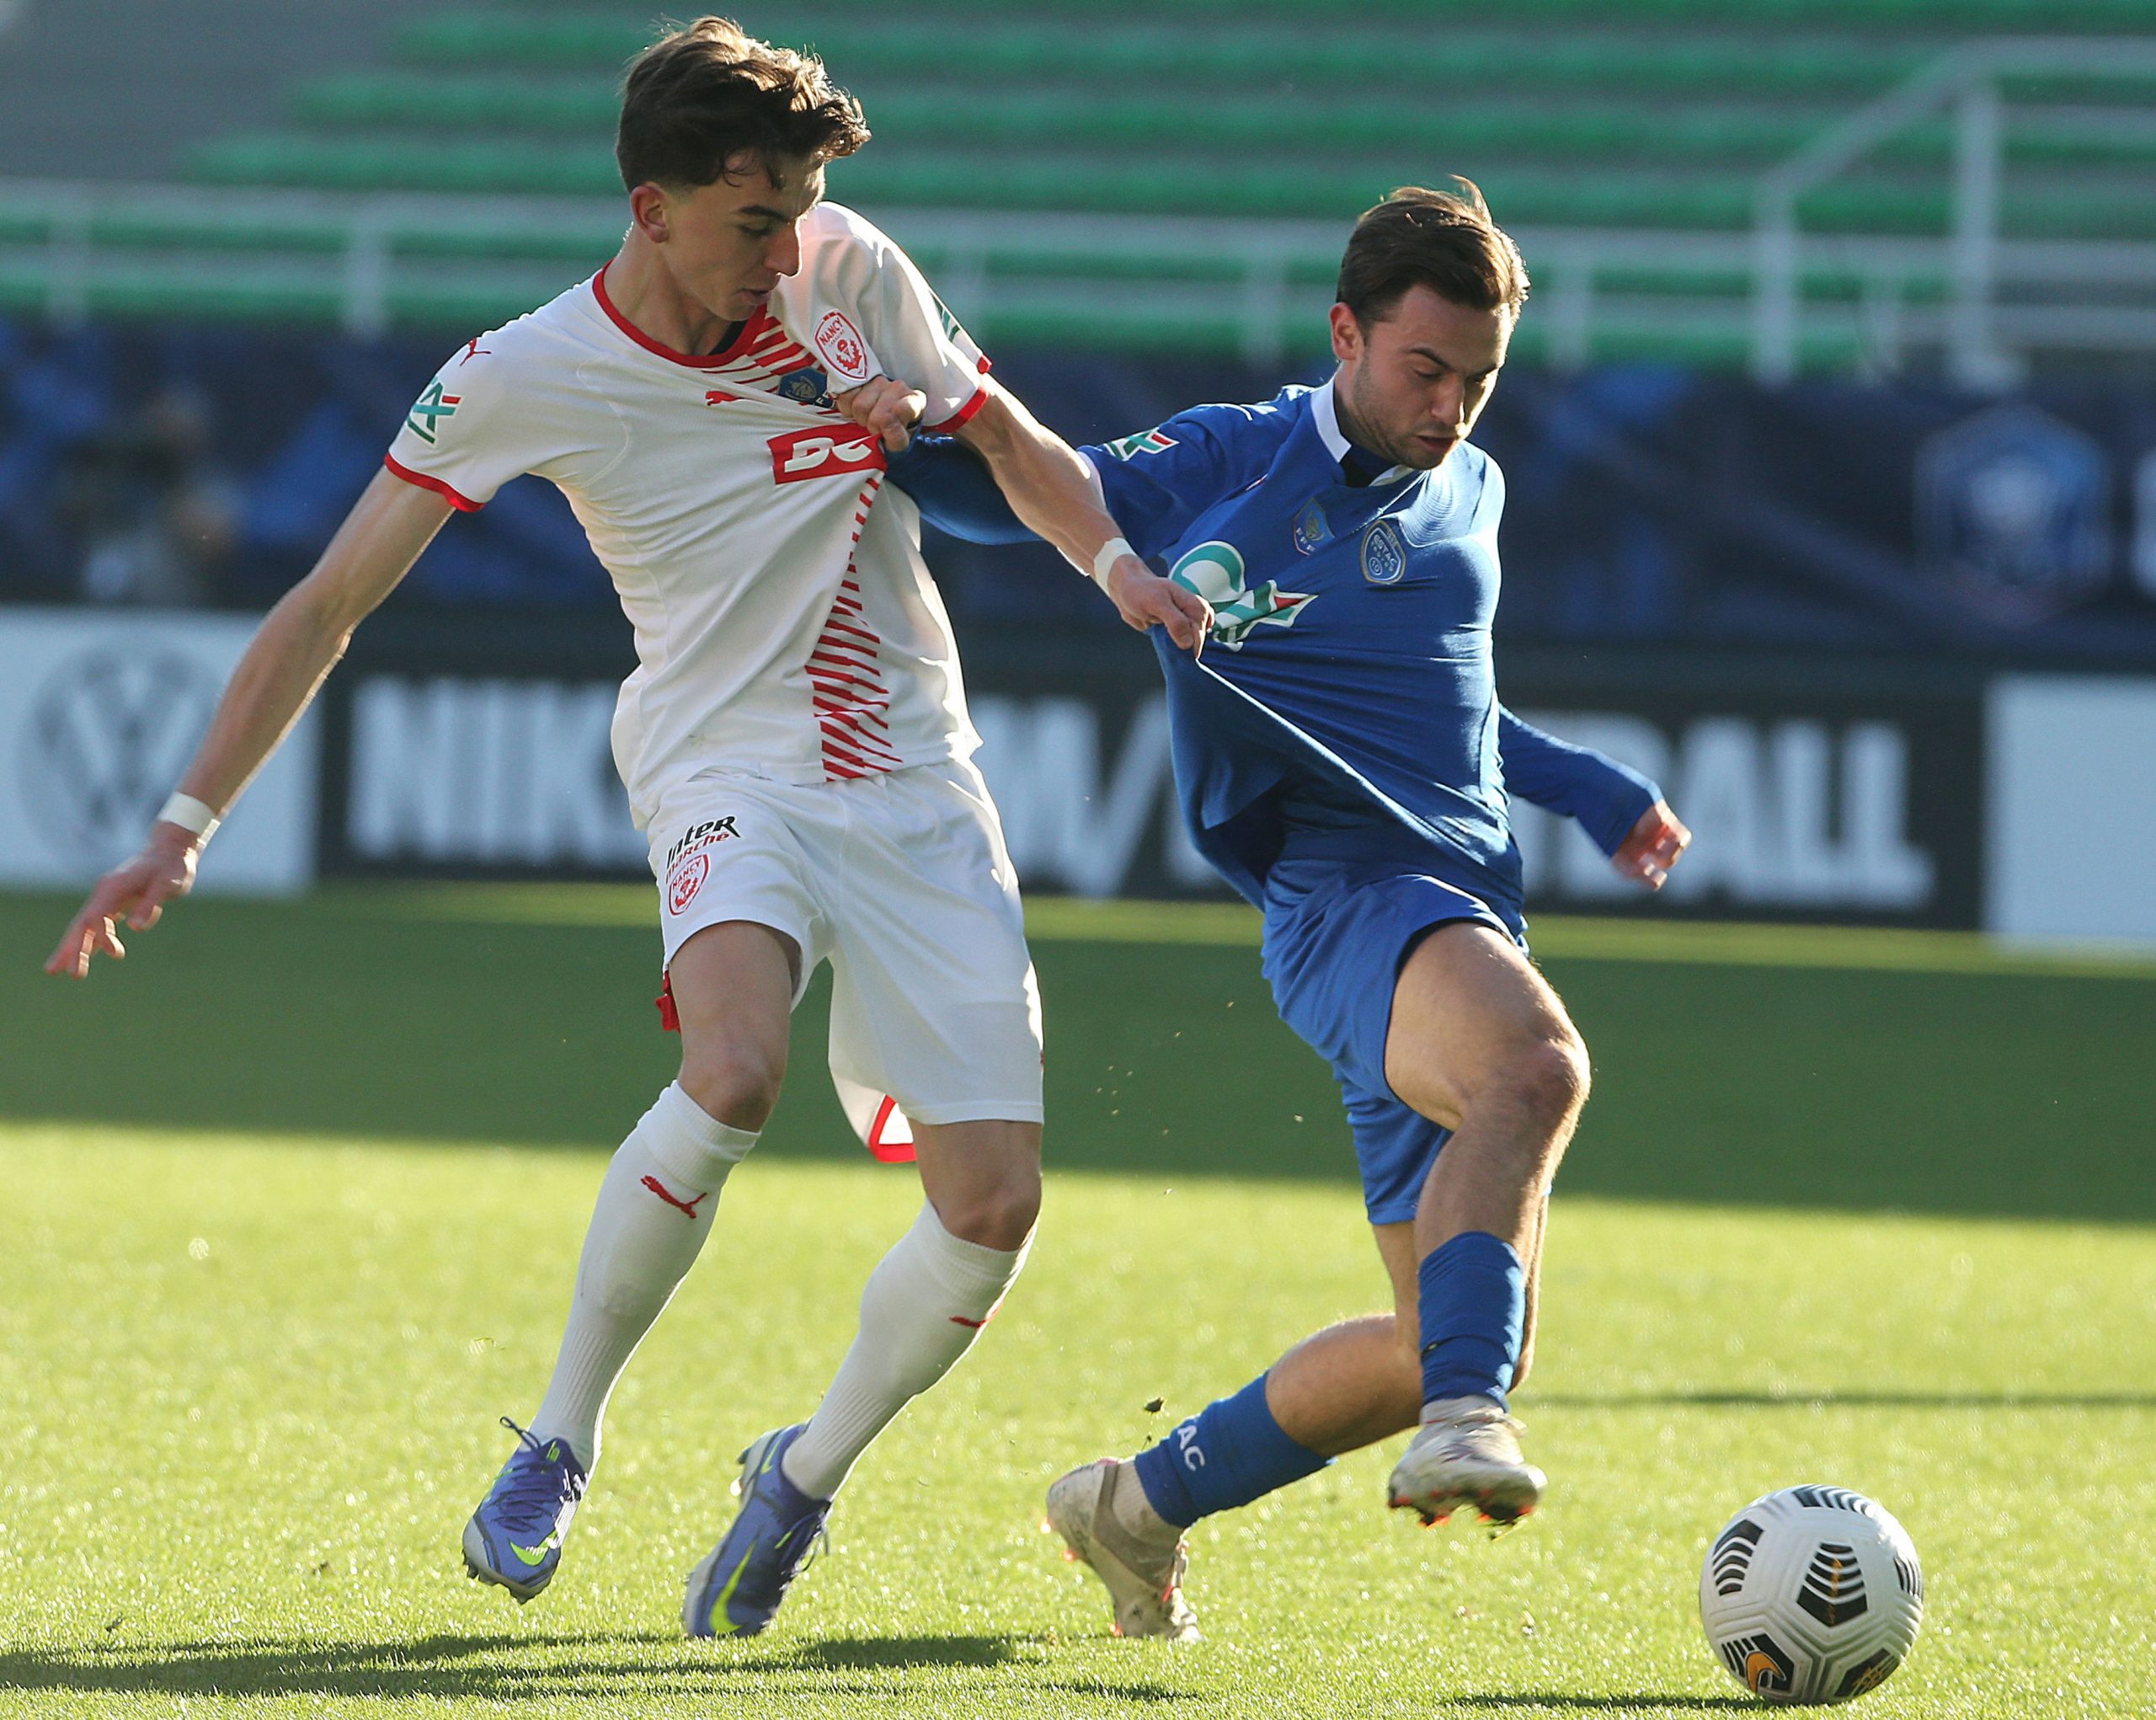 Former Celtic star Patrick Roberts playing for Troyes